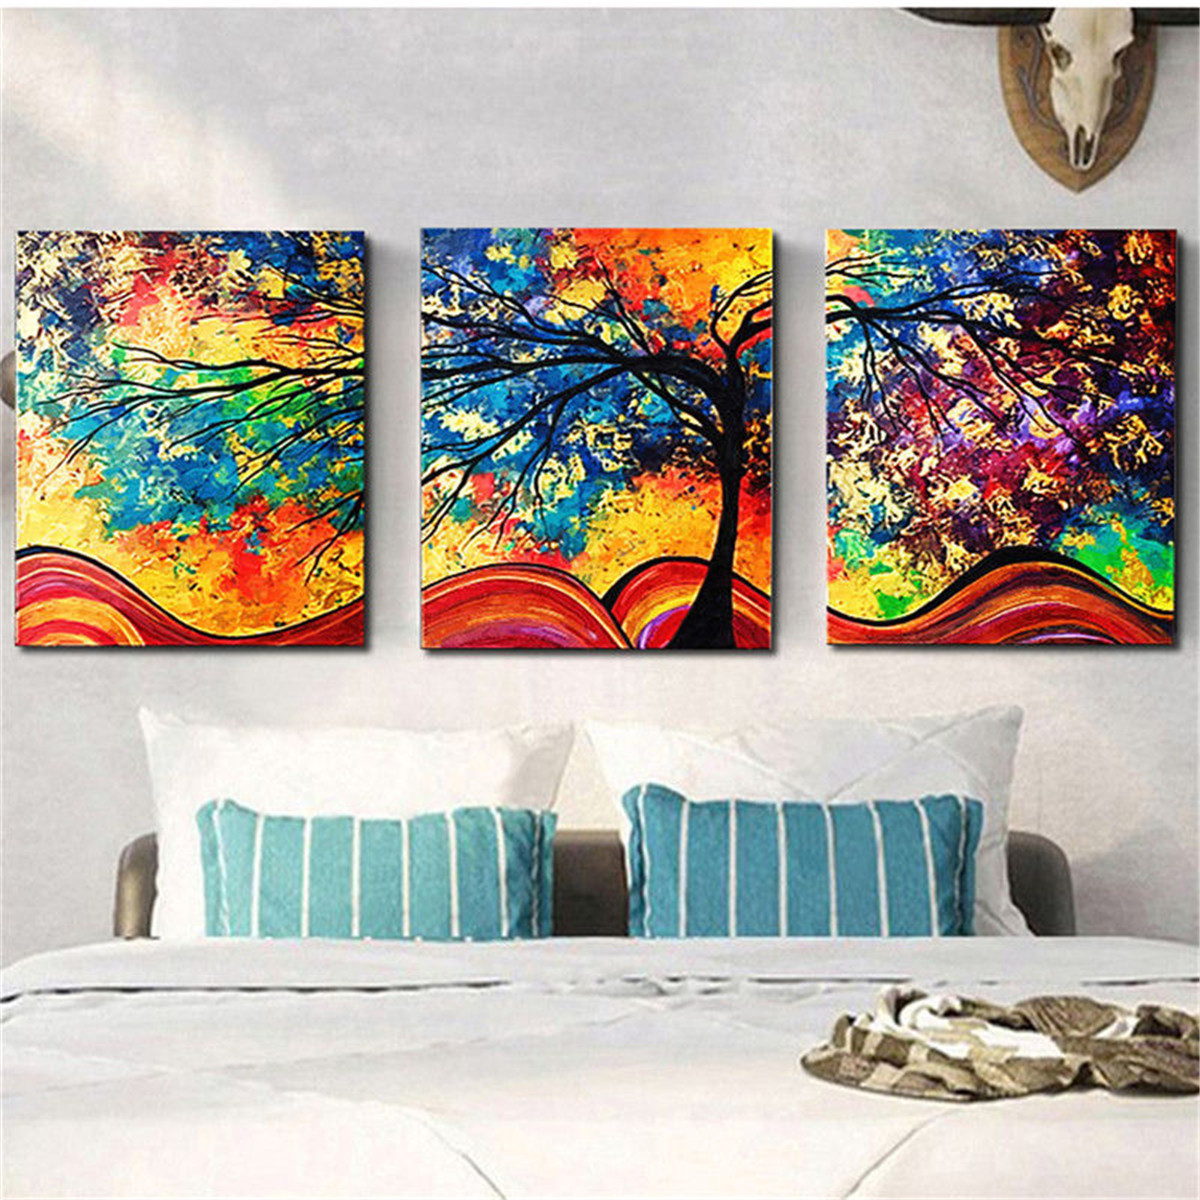 3Pcs-Colorful-Tree-HD-Canvas-Print-Paintings-Wall-Decorative-Print-Art-Pictures-FramedFrameless-Wall-1187263-4